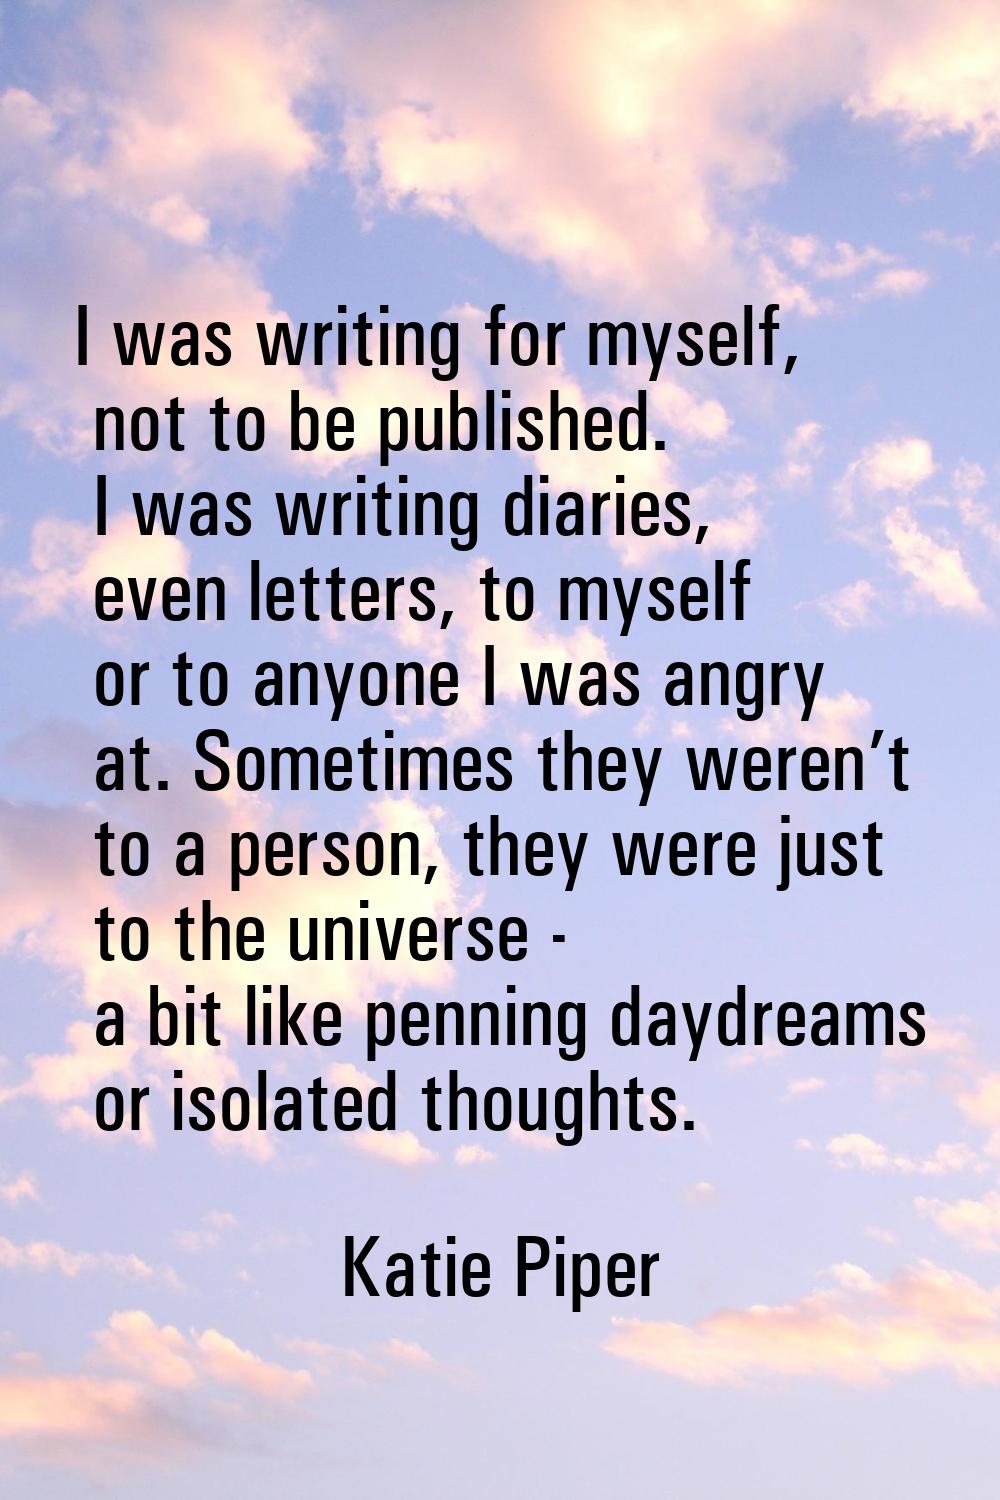 I was writing for myself, not to be published. I was writing diaries, even letters, to myself or to